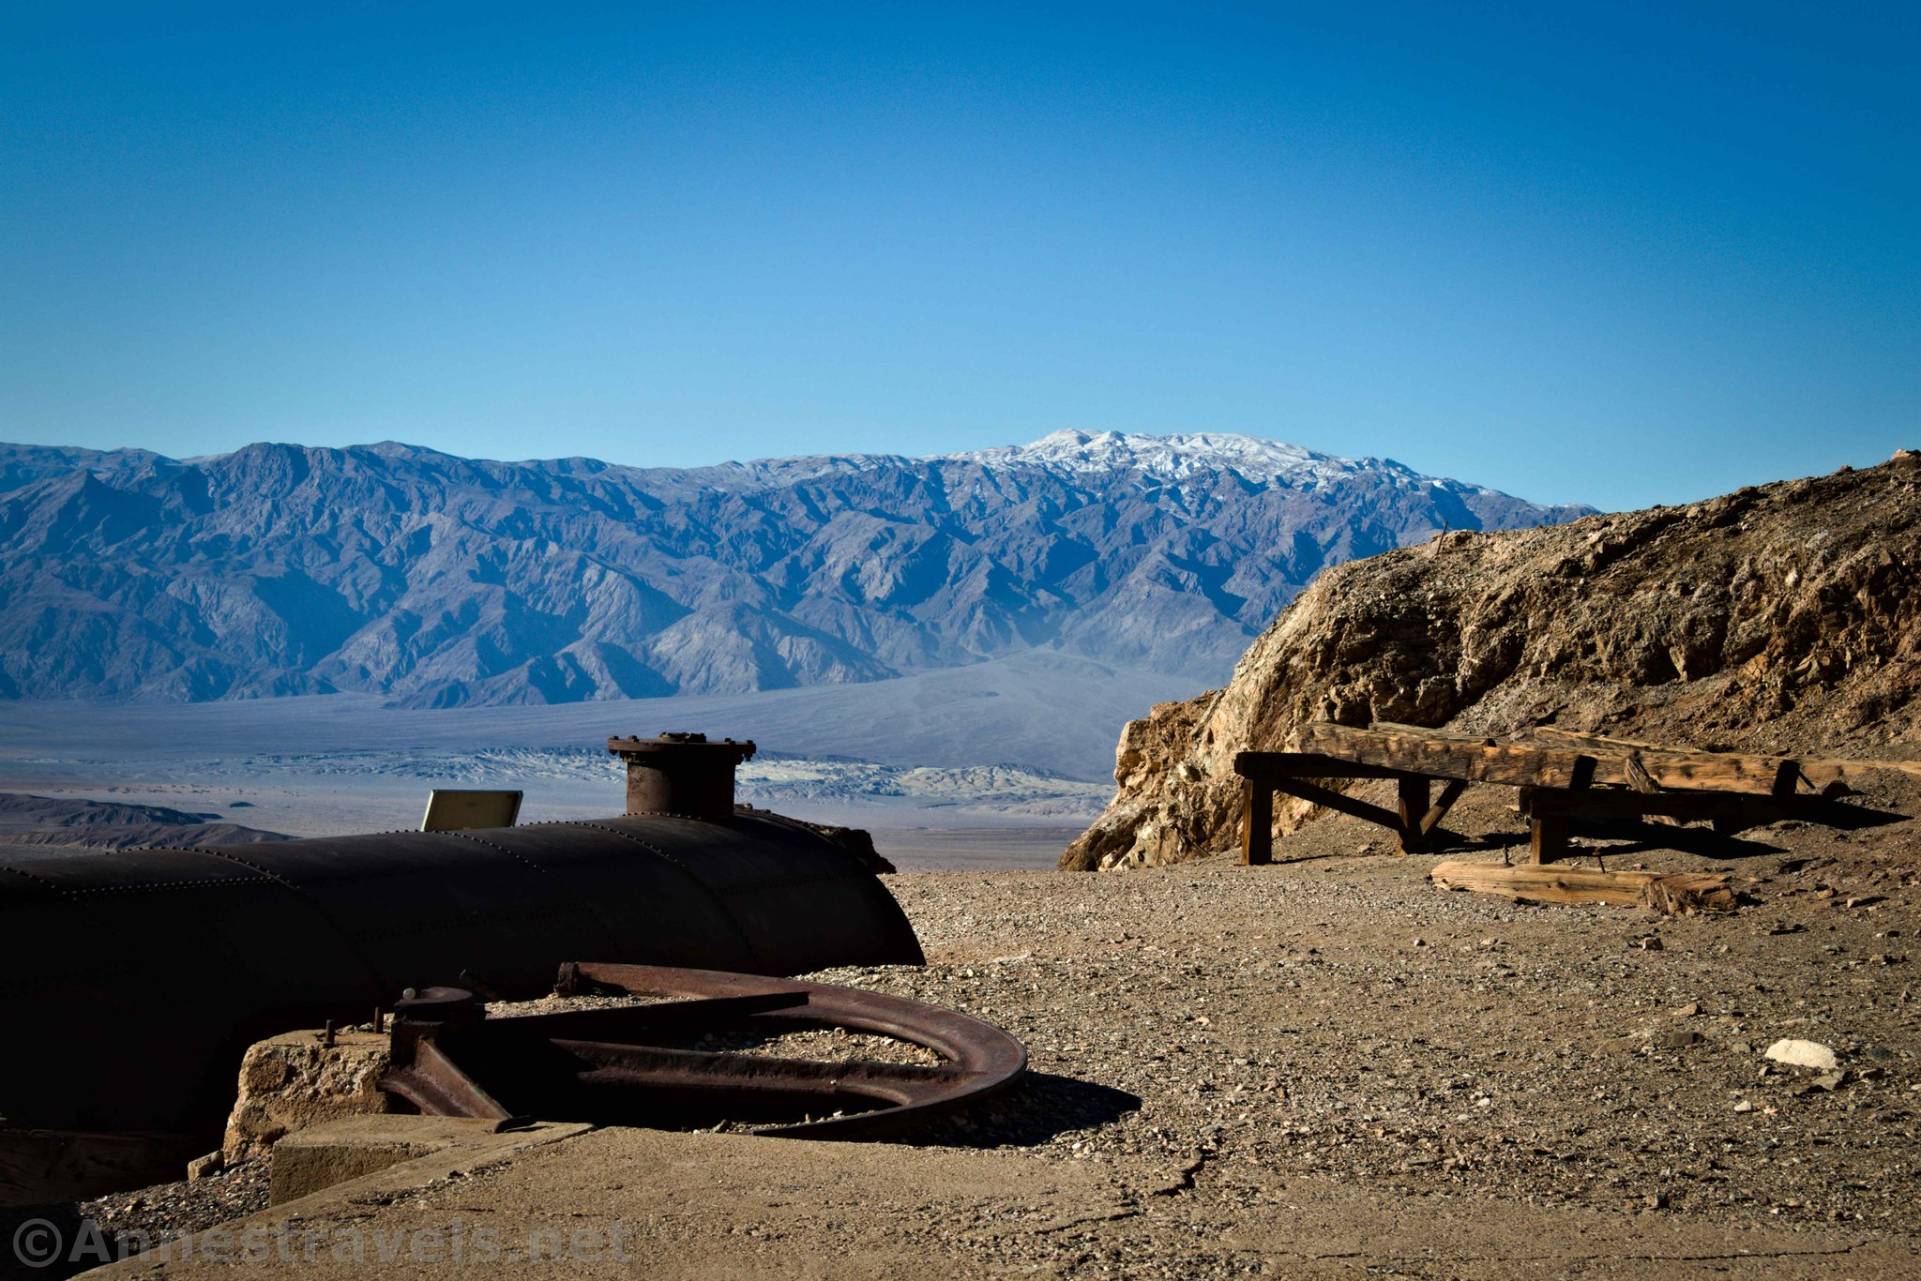 High Sierras from the Keane Wonder Mill, Death Valley National Park, California